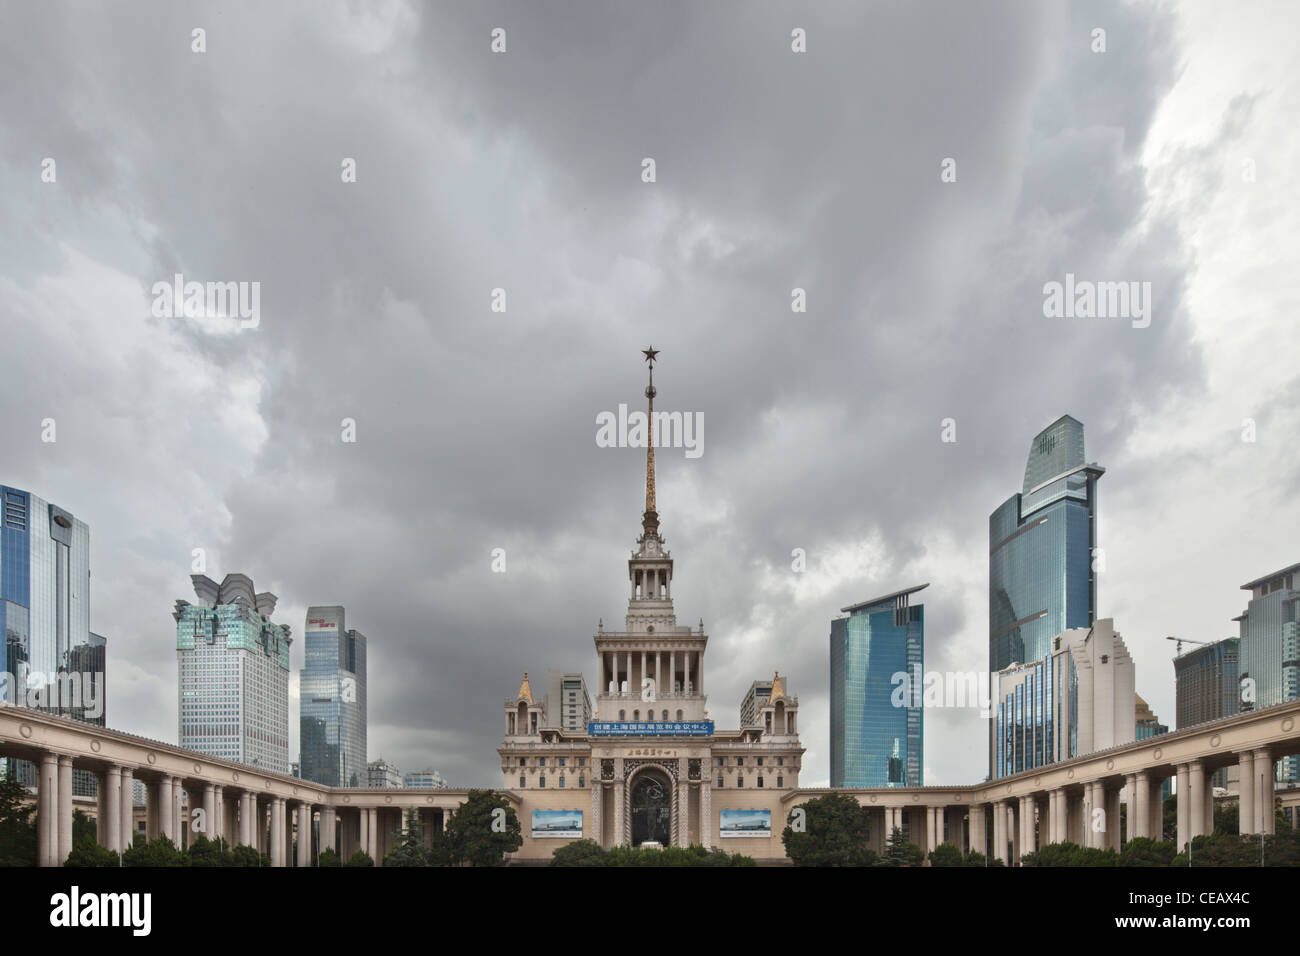 Shanghai Exhibition Center on a stormy day Stock Photo